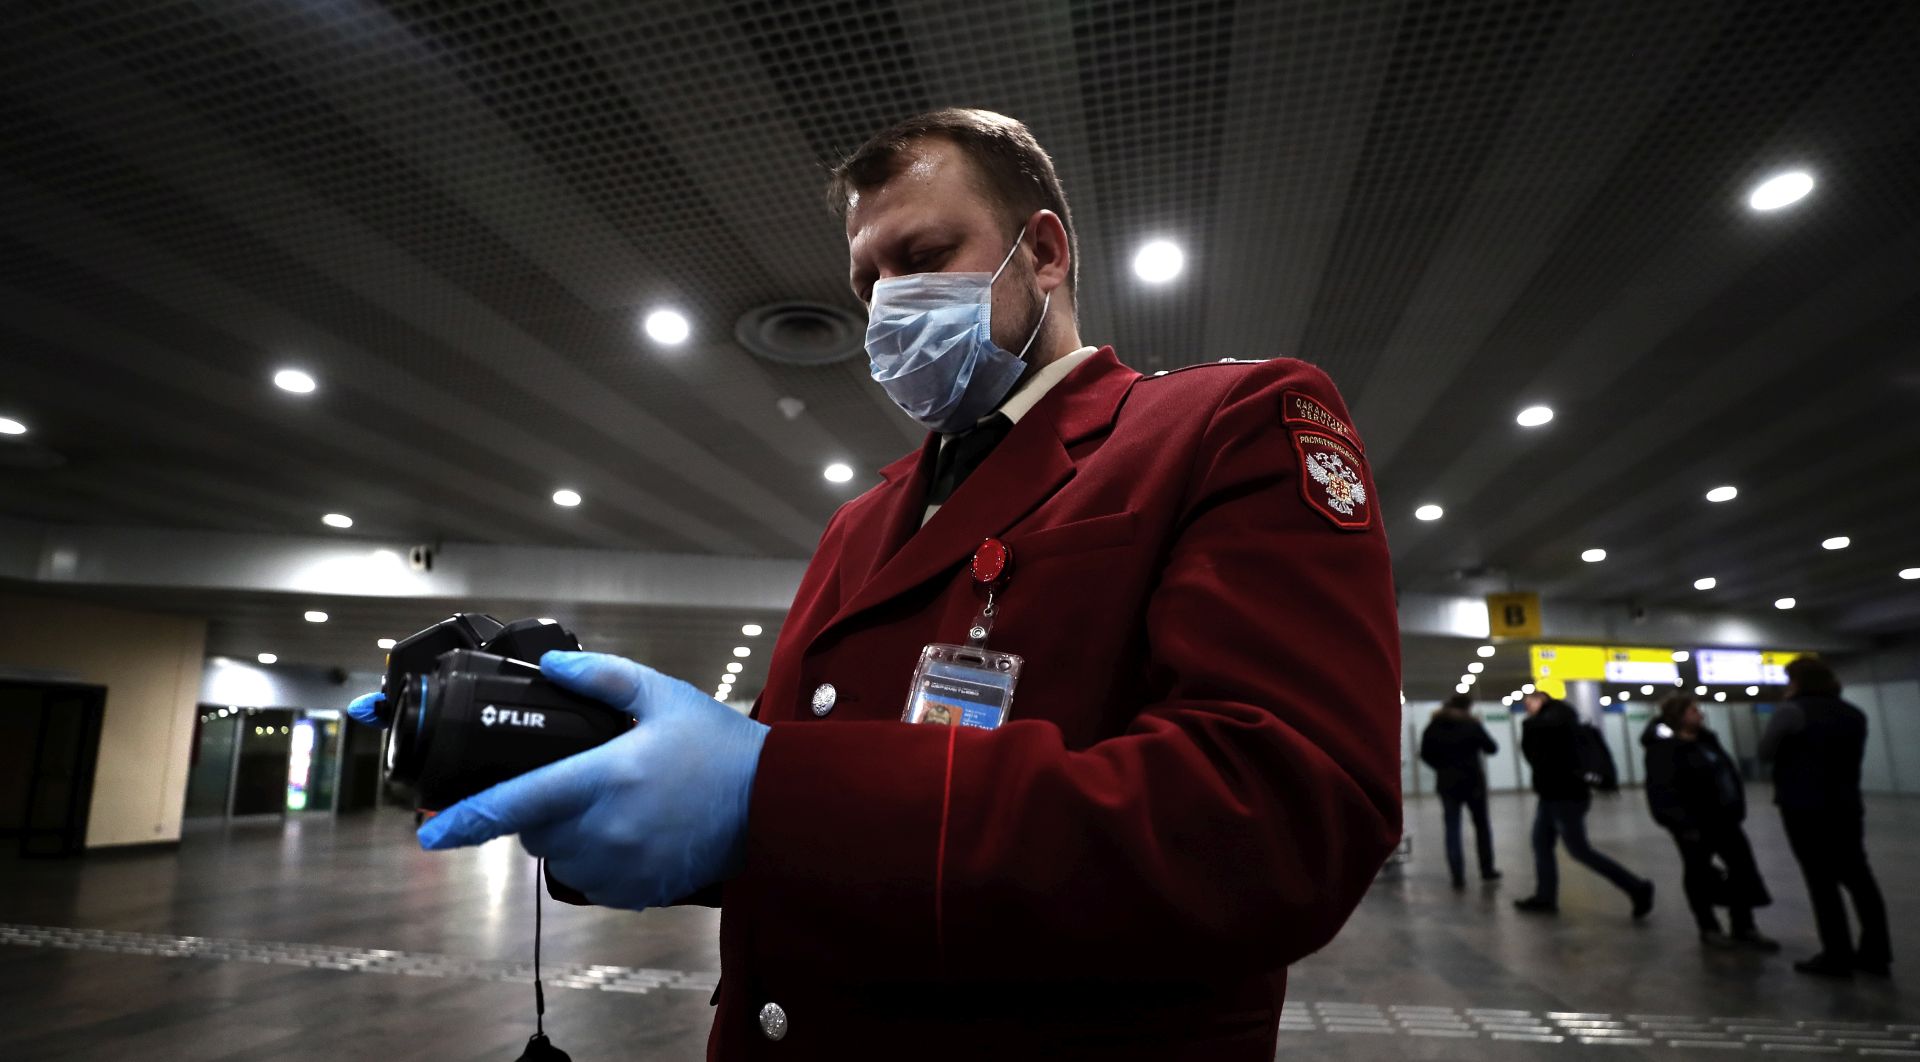 epa08178132 An official of Russian Quarantine Service of Rospotrebnadzor (Federal Service for the Oversight of Consumer Protection and Welfare) uses thermal imaging devices to remotely measure temperature of passengers at the Sheremetyevo airport in Moscow, Russia, 30 January 2020. The outbreak of coronavirus has so far claimed 170 lives and infected more than 8,000 others, according to media reports. 
Russian health and immigration officials have taken action to screen those arriving at the country from China over the virus fears.  EPA/MAXIM SHIPENKOV